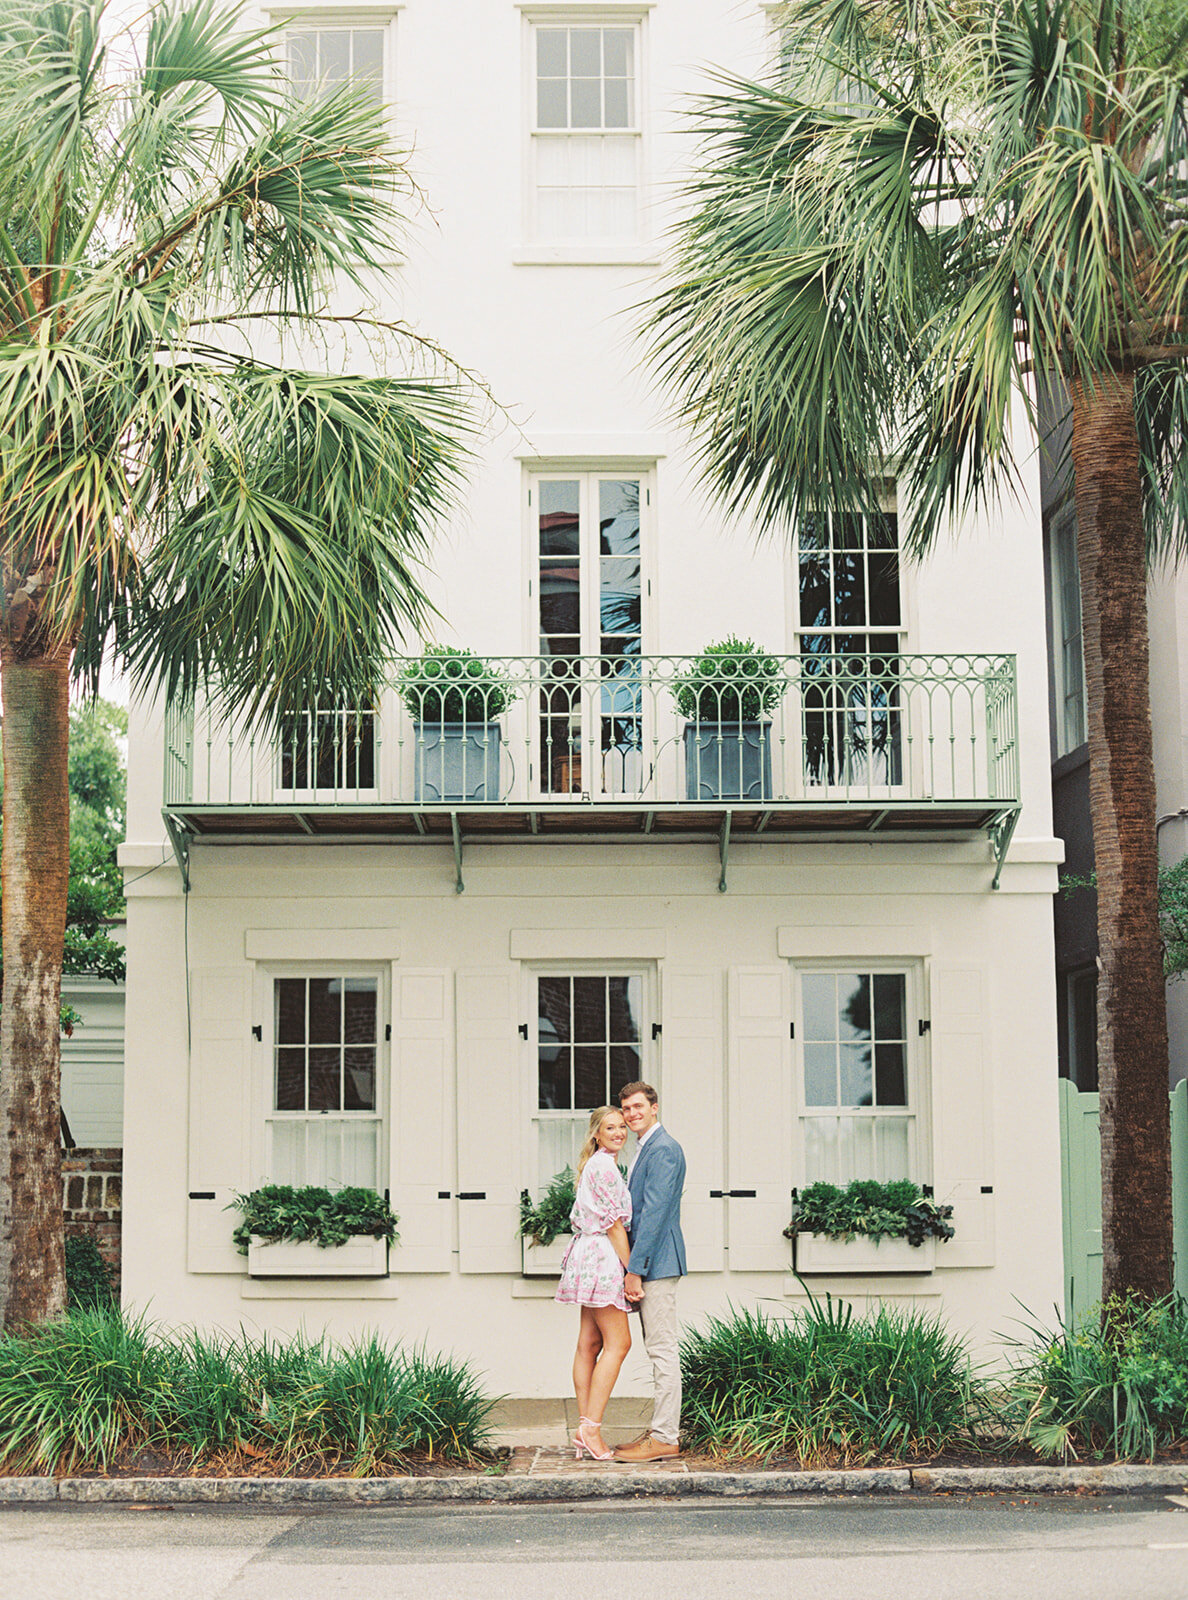 FILM_downtown_spring_charleston_engagement_battery_rainbow_row_palm_trees_kailee_dimeglio_photography-108_websize